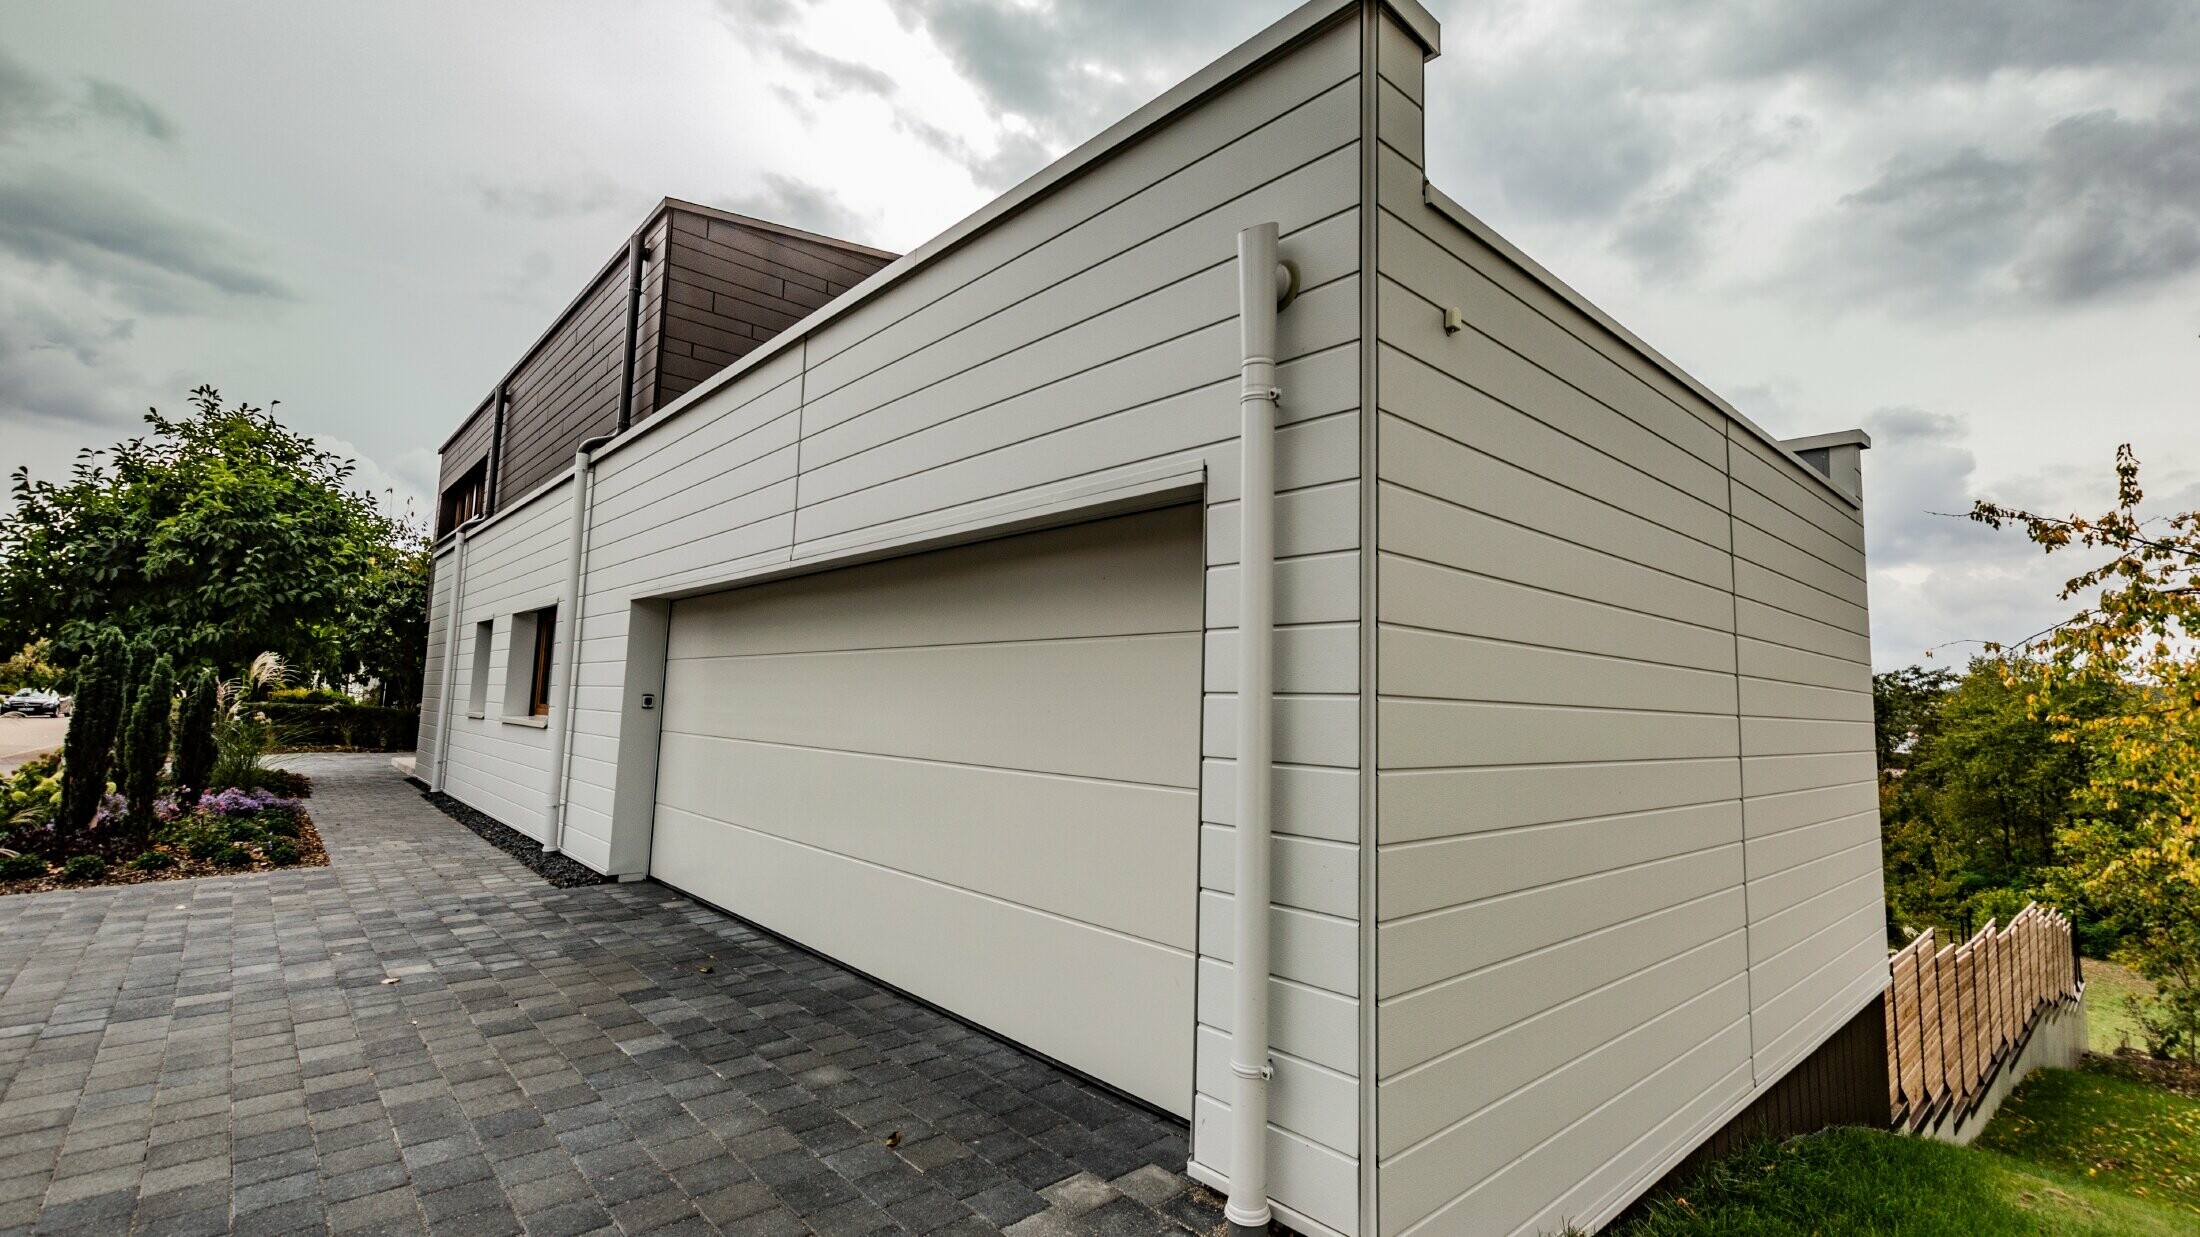 Garage cladding with horizontally installed PREFA siding in white together with the PREFA parapet outlet connector.